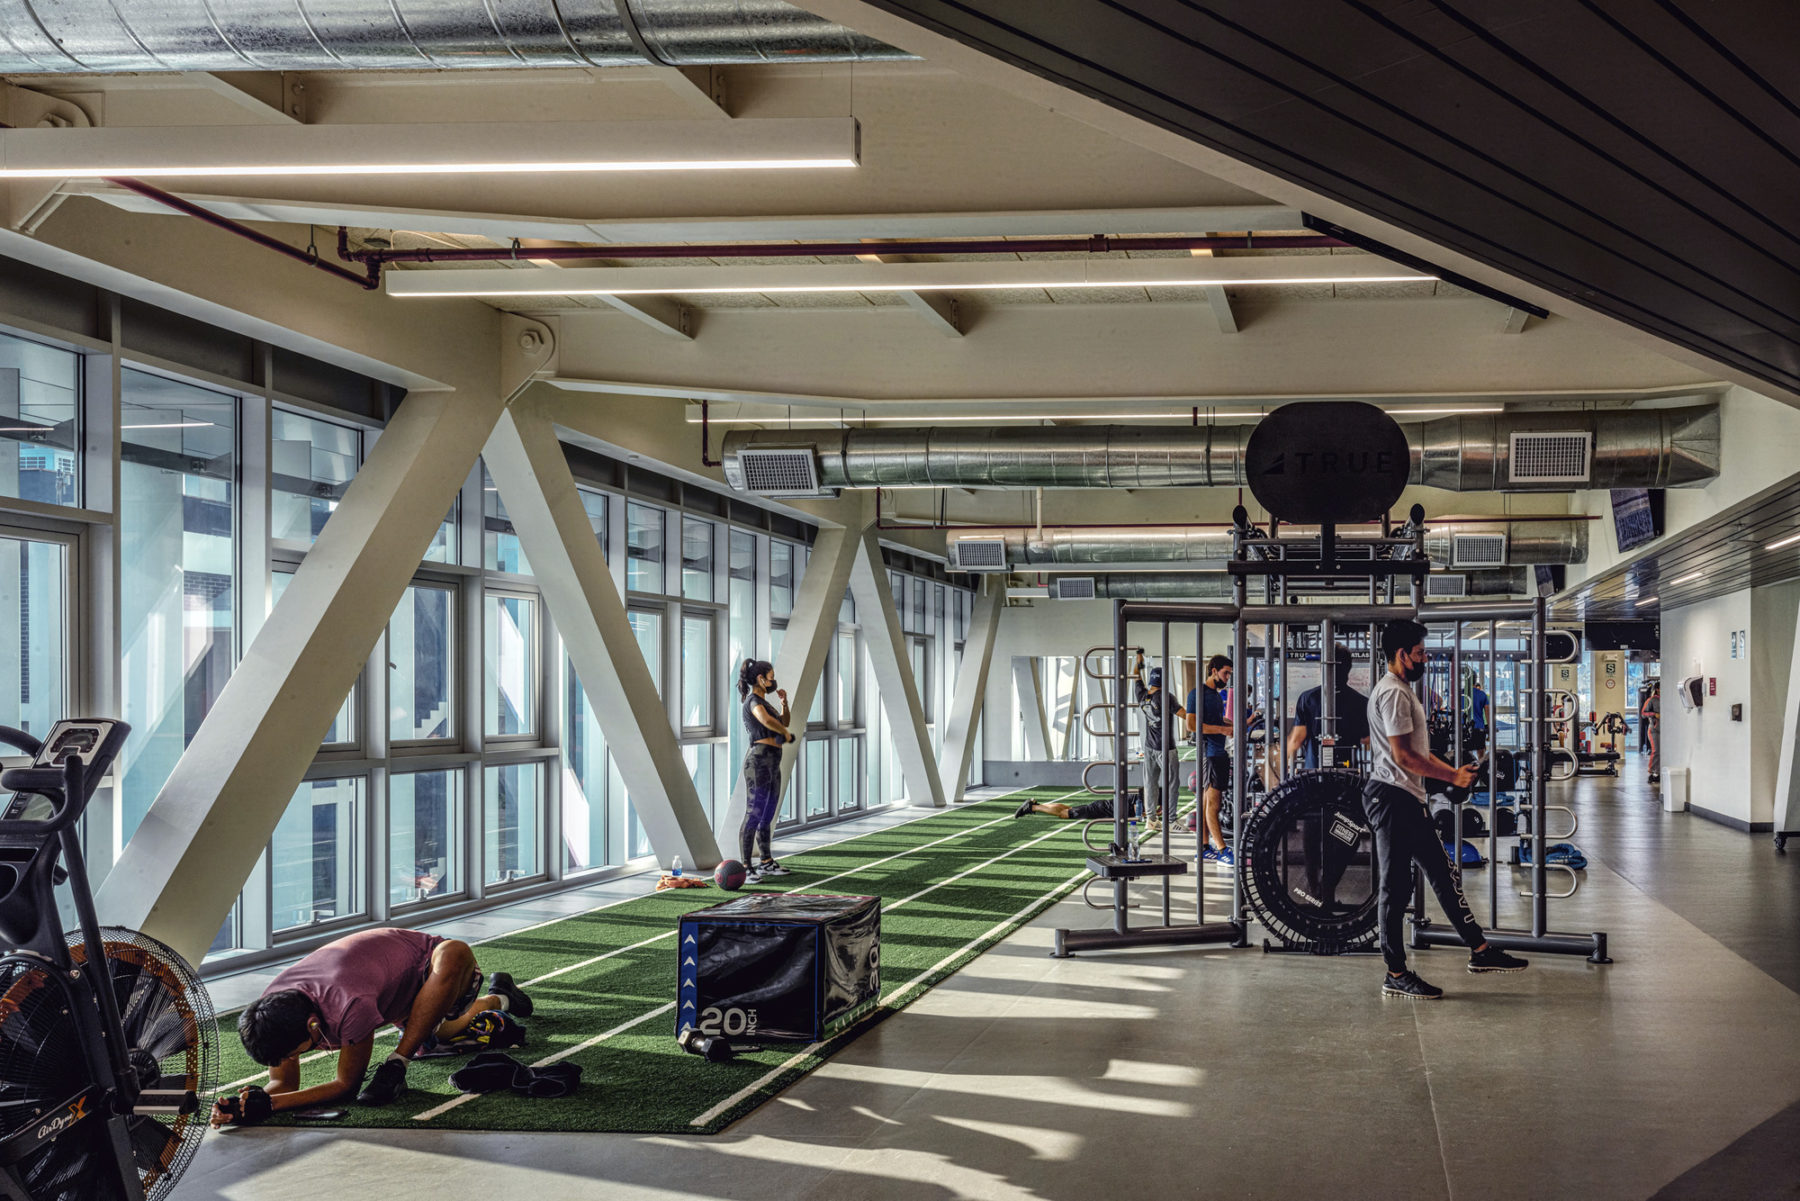 interior photo of crossfit area with a single student working out on a green carpet near the exterior building trusses